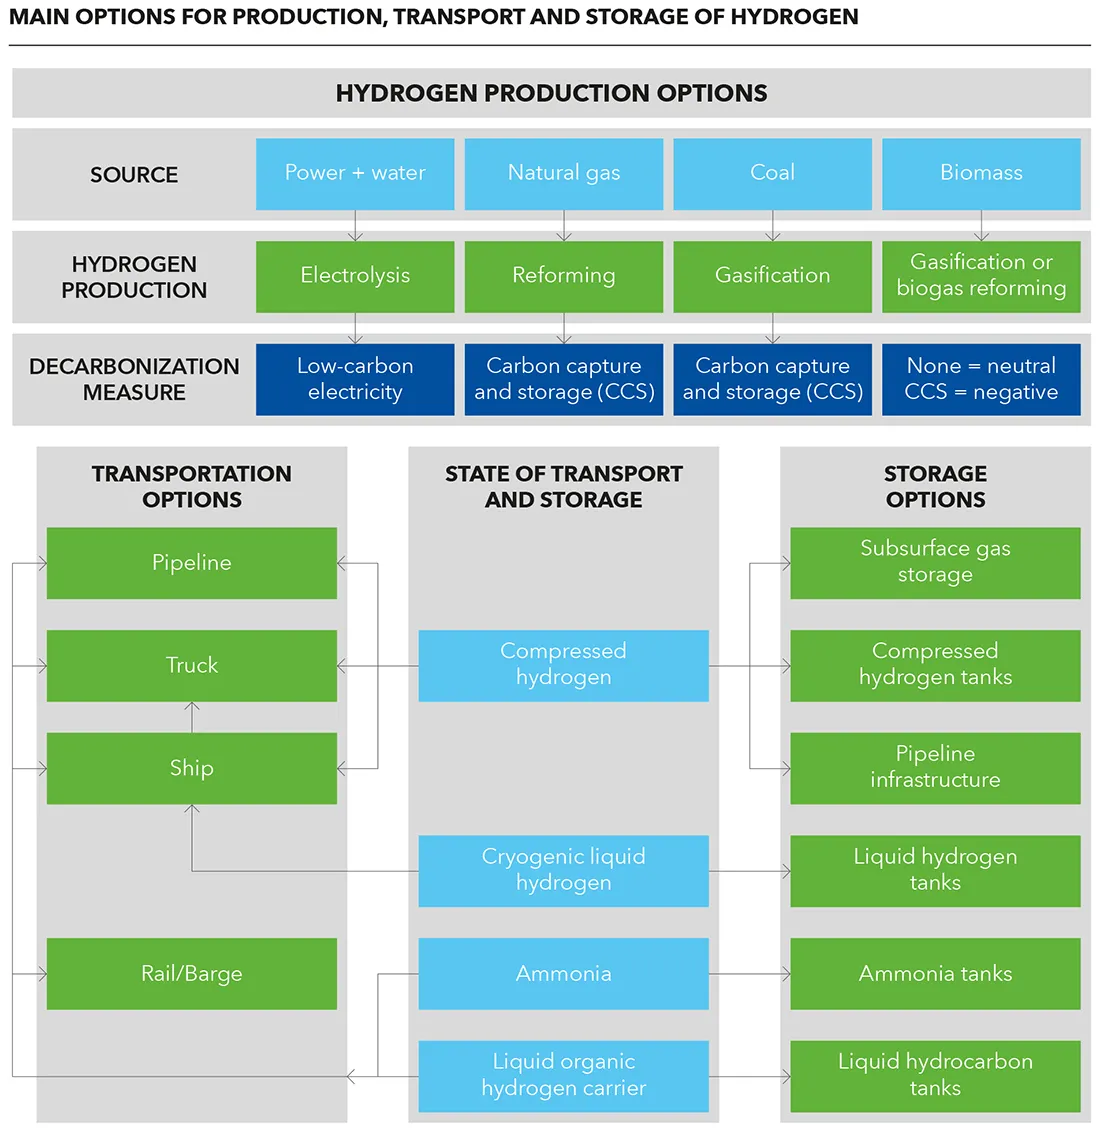 Figure 1: Main options for production, transport and storage of hydrogen 